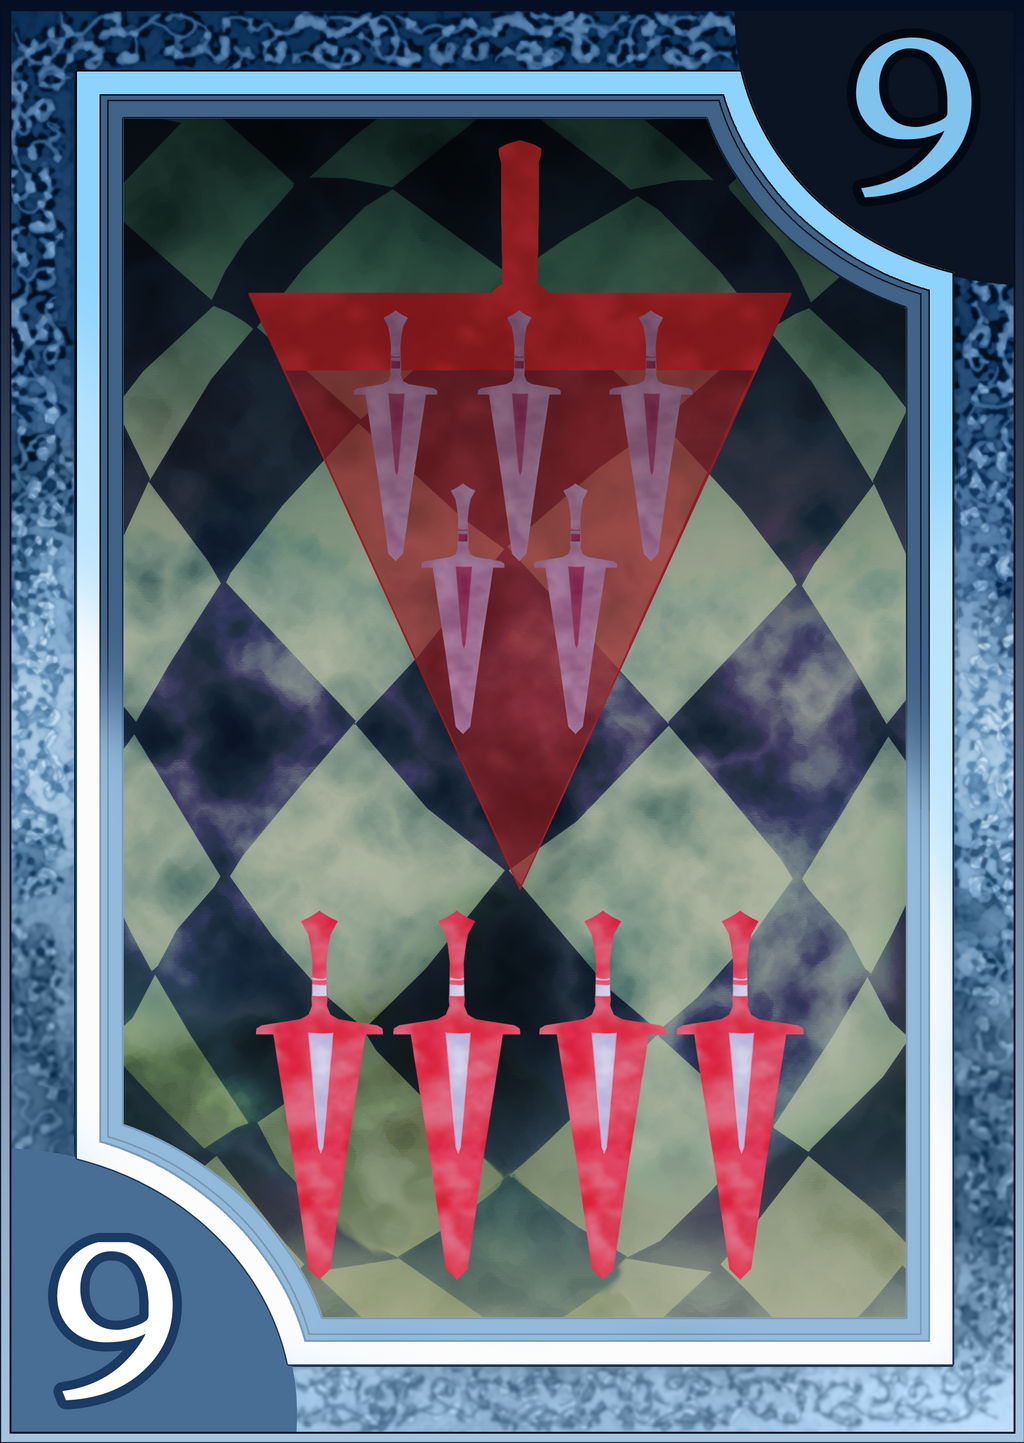 Persona 3/4 Tarot Card Deck HR - Suit of Swords 9 by Enetirnel on ...